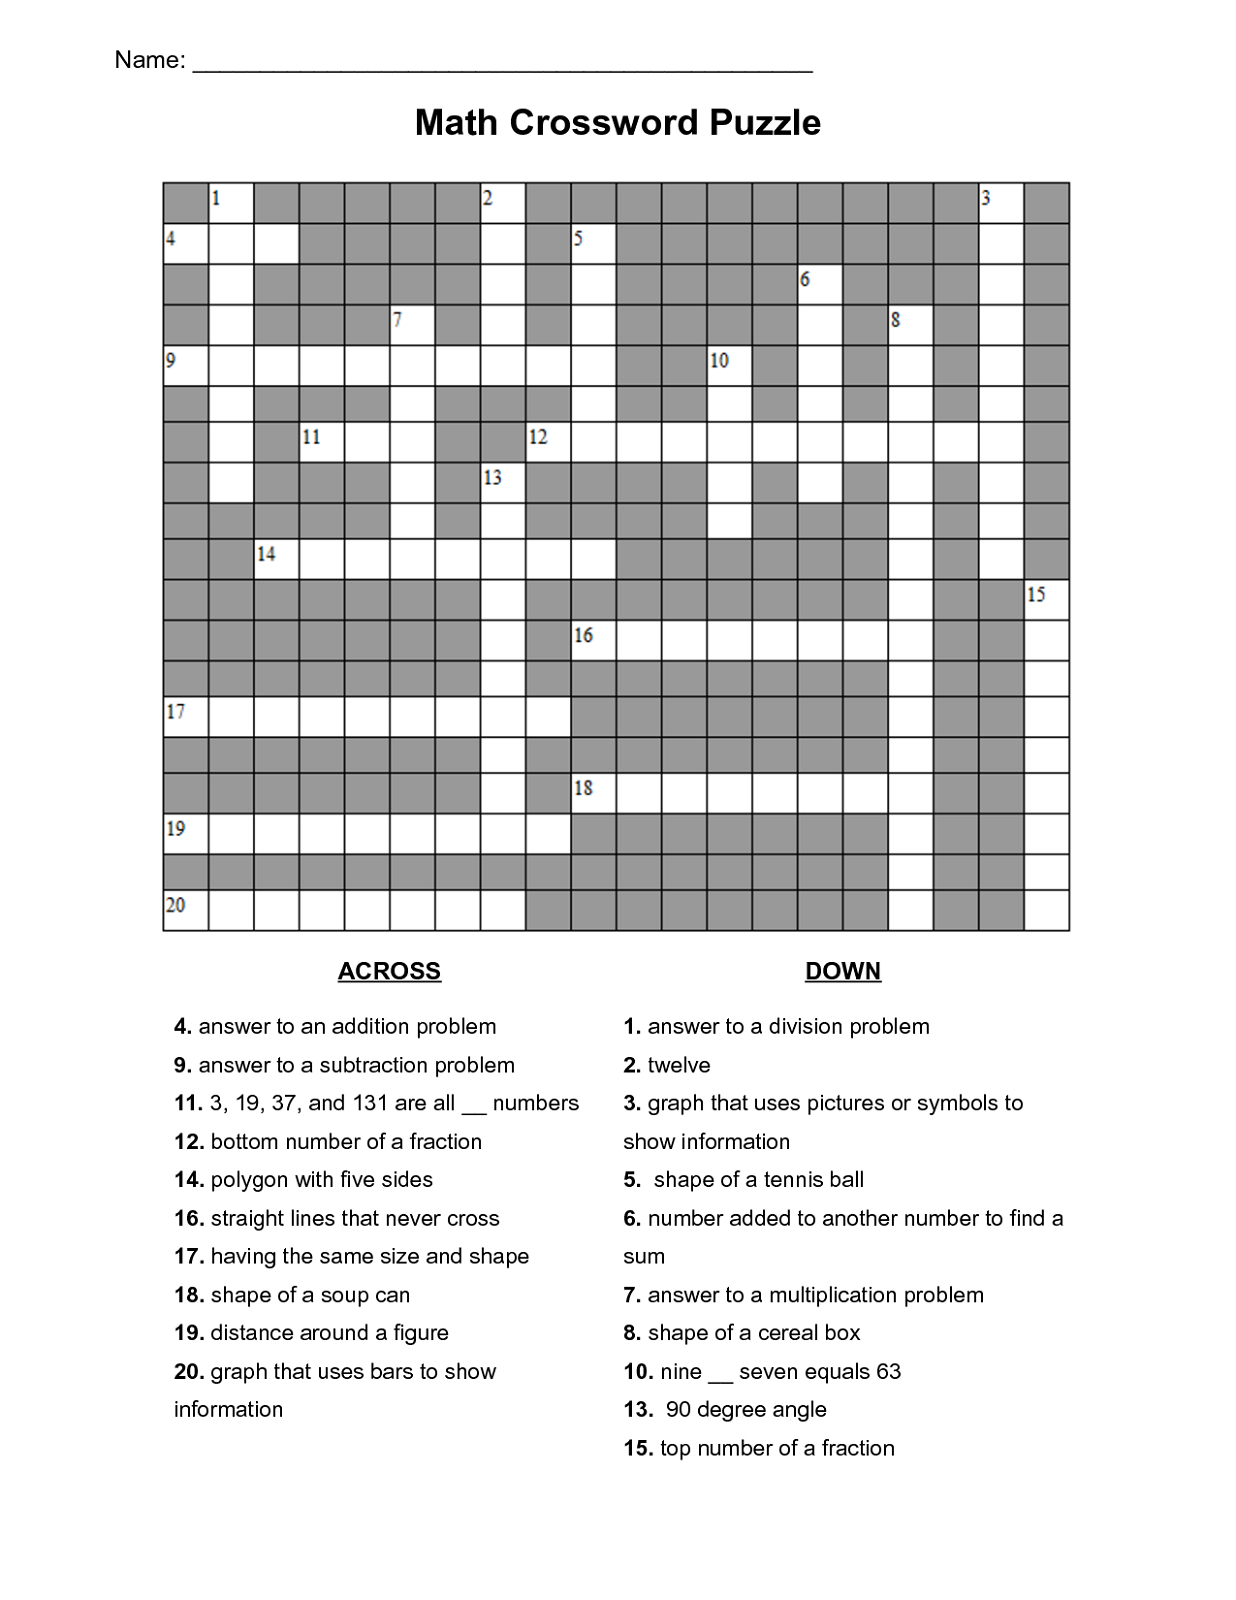 Math Puzzles Printable For Learning | Activity Shelter - Printable Crossword Puzzles Grade 3